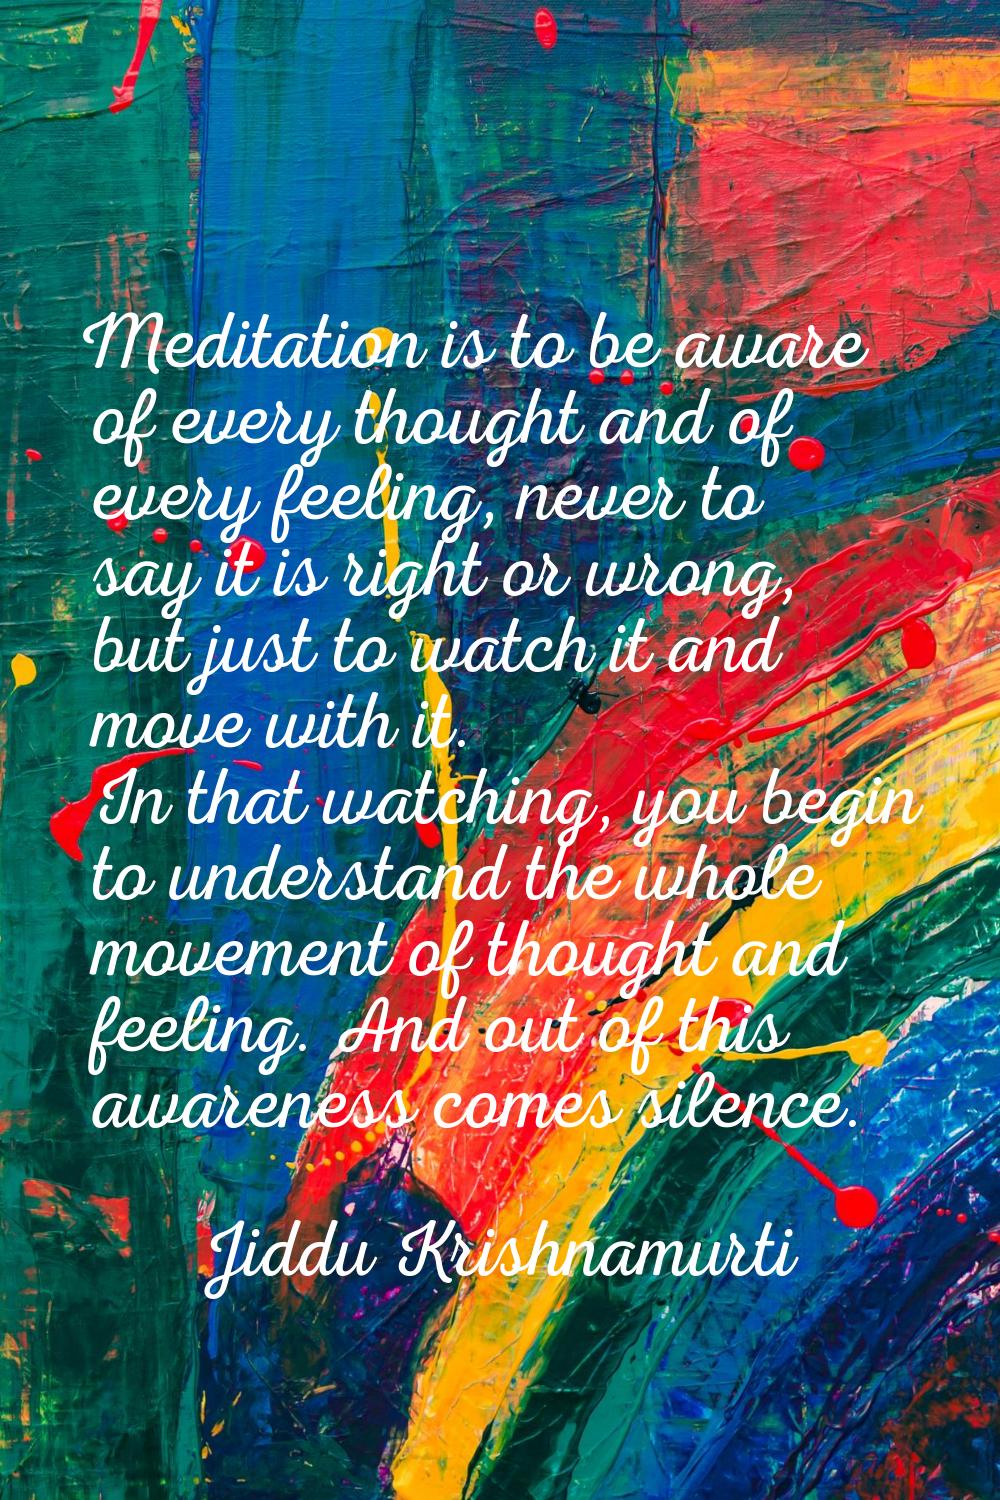 Meditation is to be aware of every thought and of every feeling, never to say it is right or wrong,